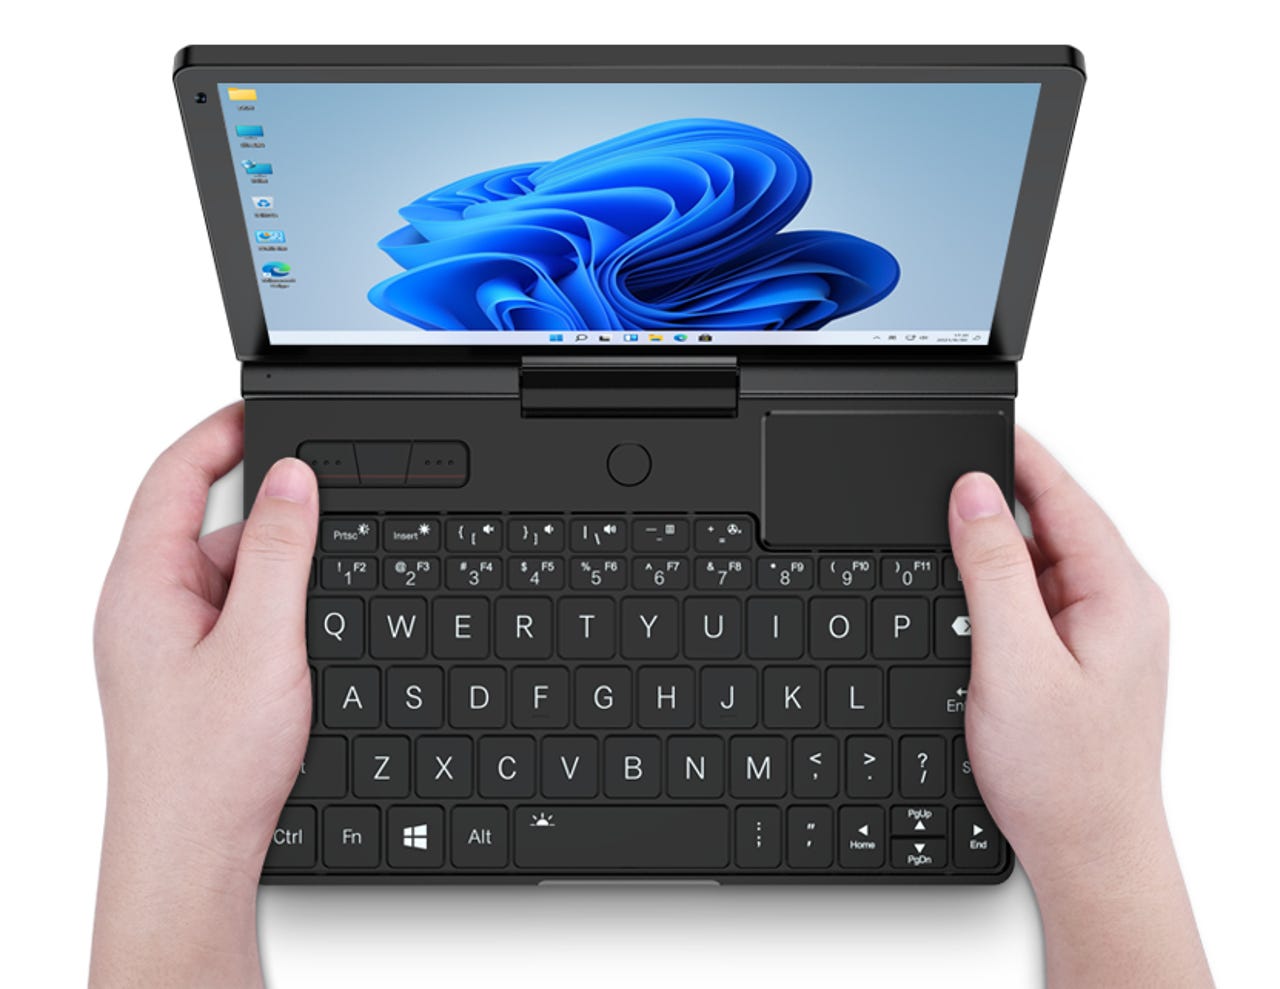 GPD Pocket 3 is a 8-inch mini-laptop with 2-in-1 design, modular port design